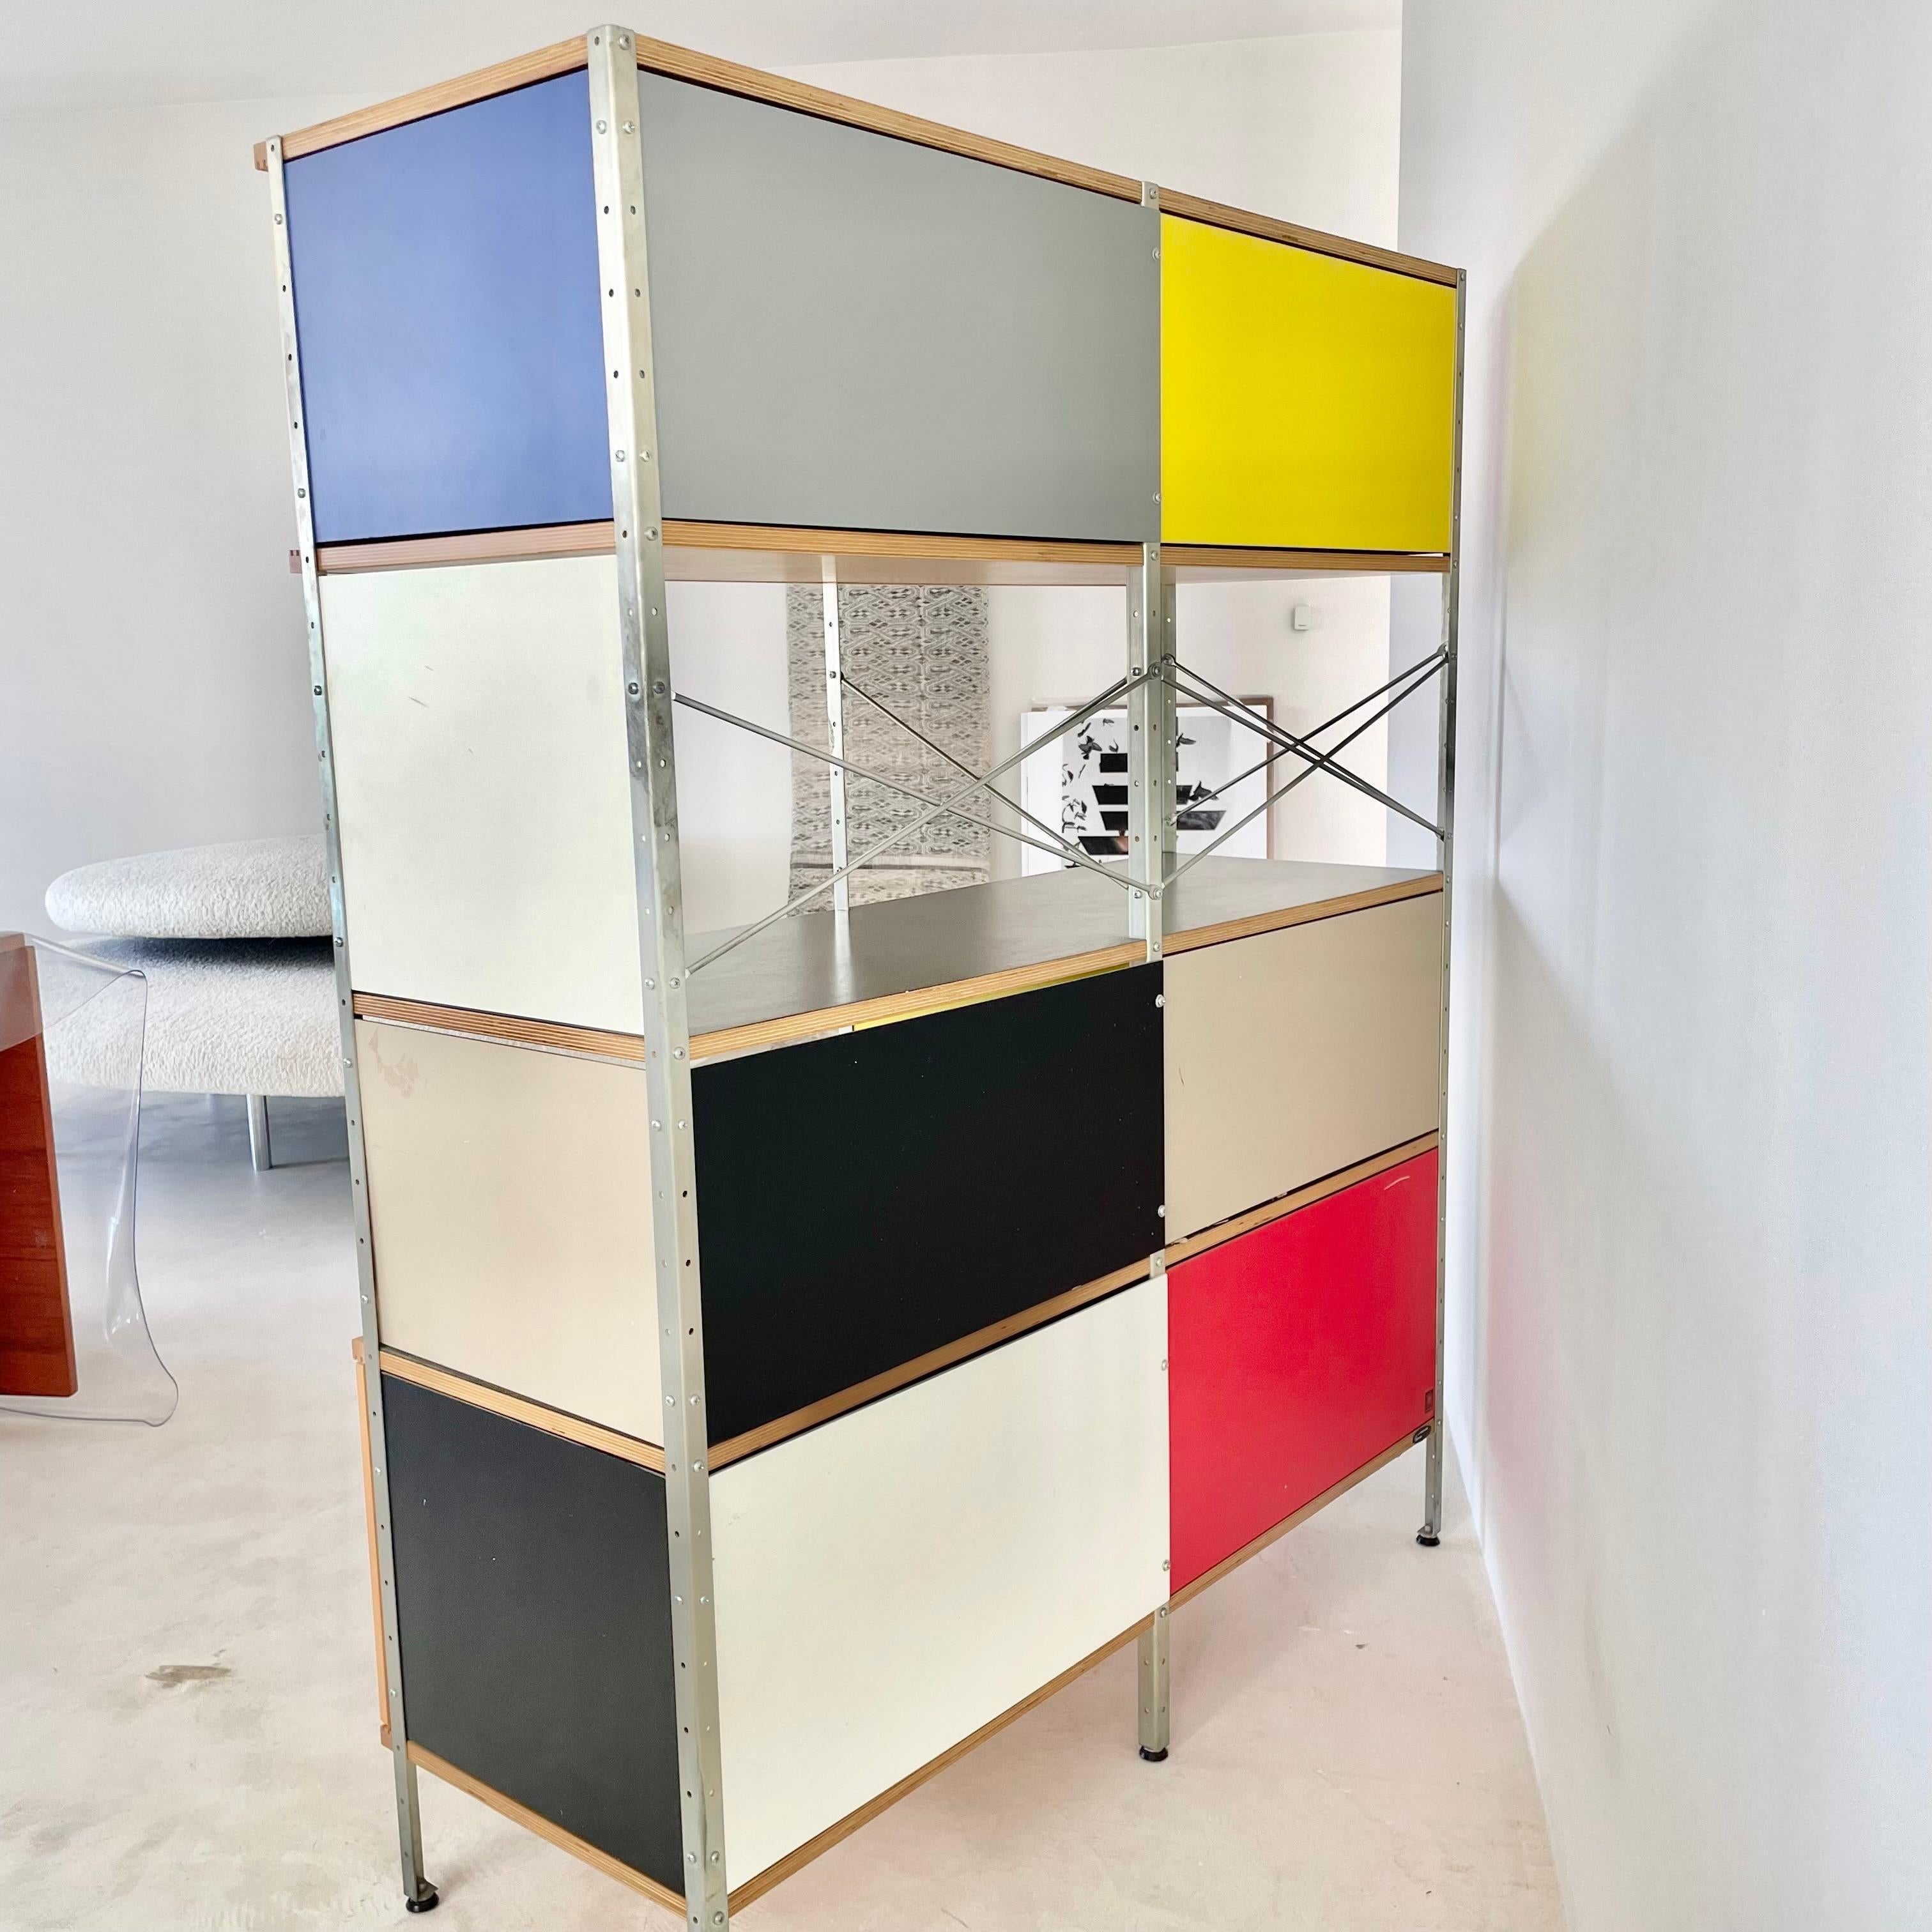 Eames storage unit for Herman Miller made in 1994. Great colors and designs on plywood. Plenty of storage space with wooden panels on the top and bottom. Shelves and 3 drawers in the middle shelf space. In good condition with light wear as shown.